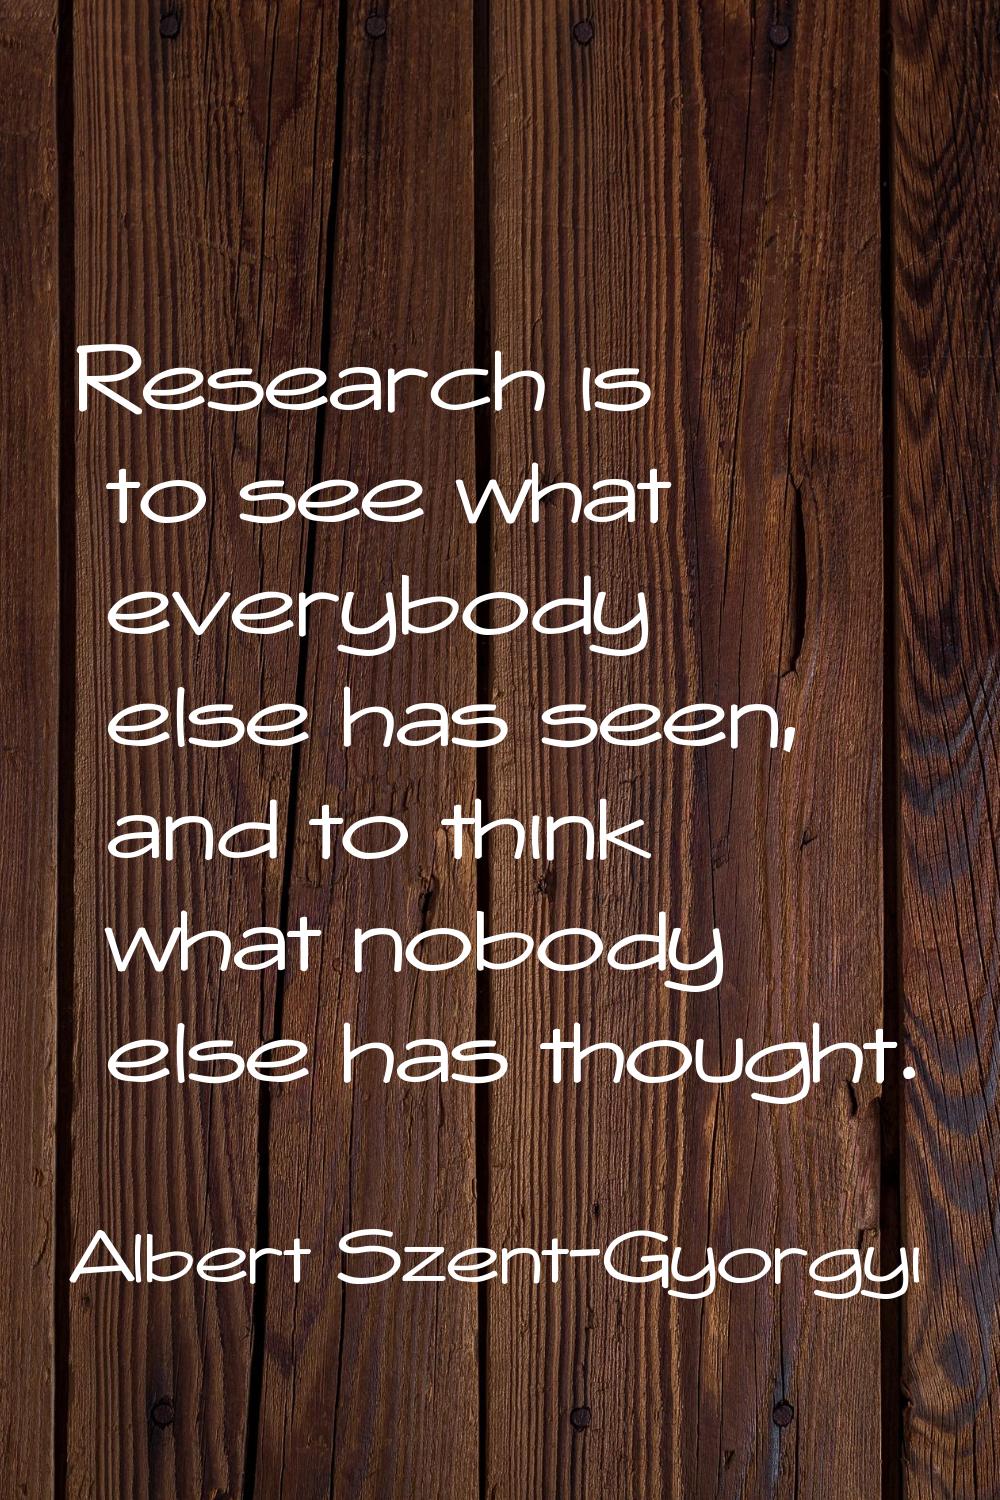 Research is to see what everybody else has seen, and to think what nobody else has thought.